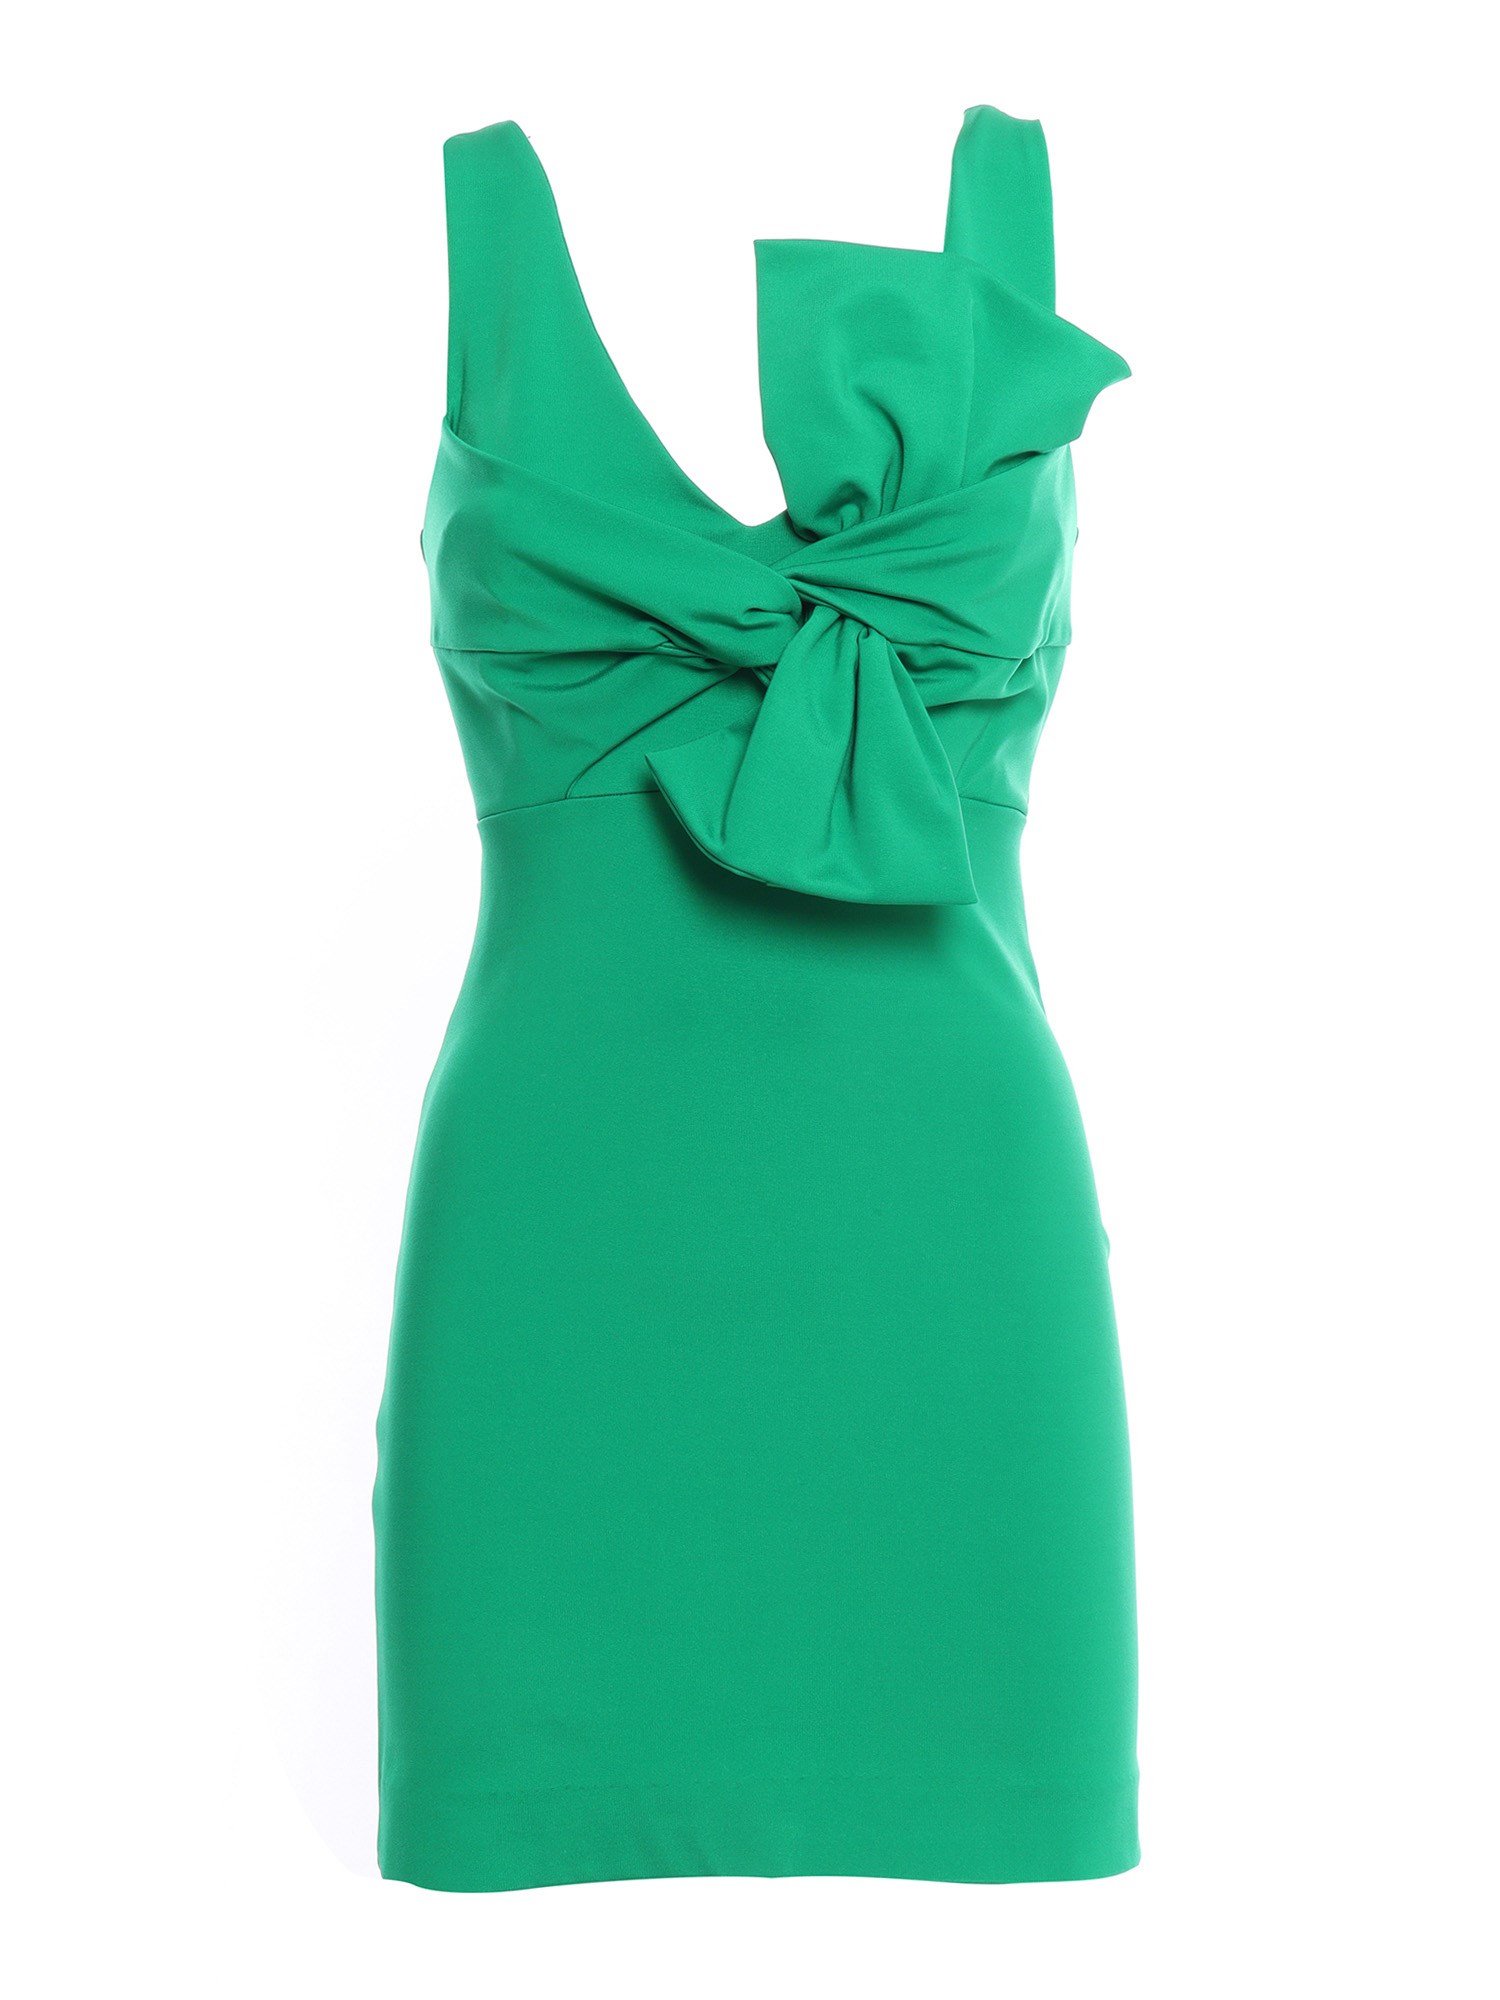 P.A.R.O.S.H DRESS WITH BOW,D731278 RENNY068